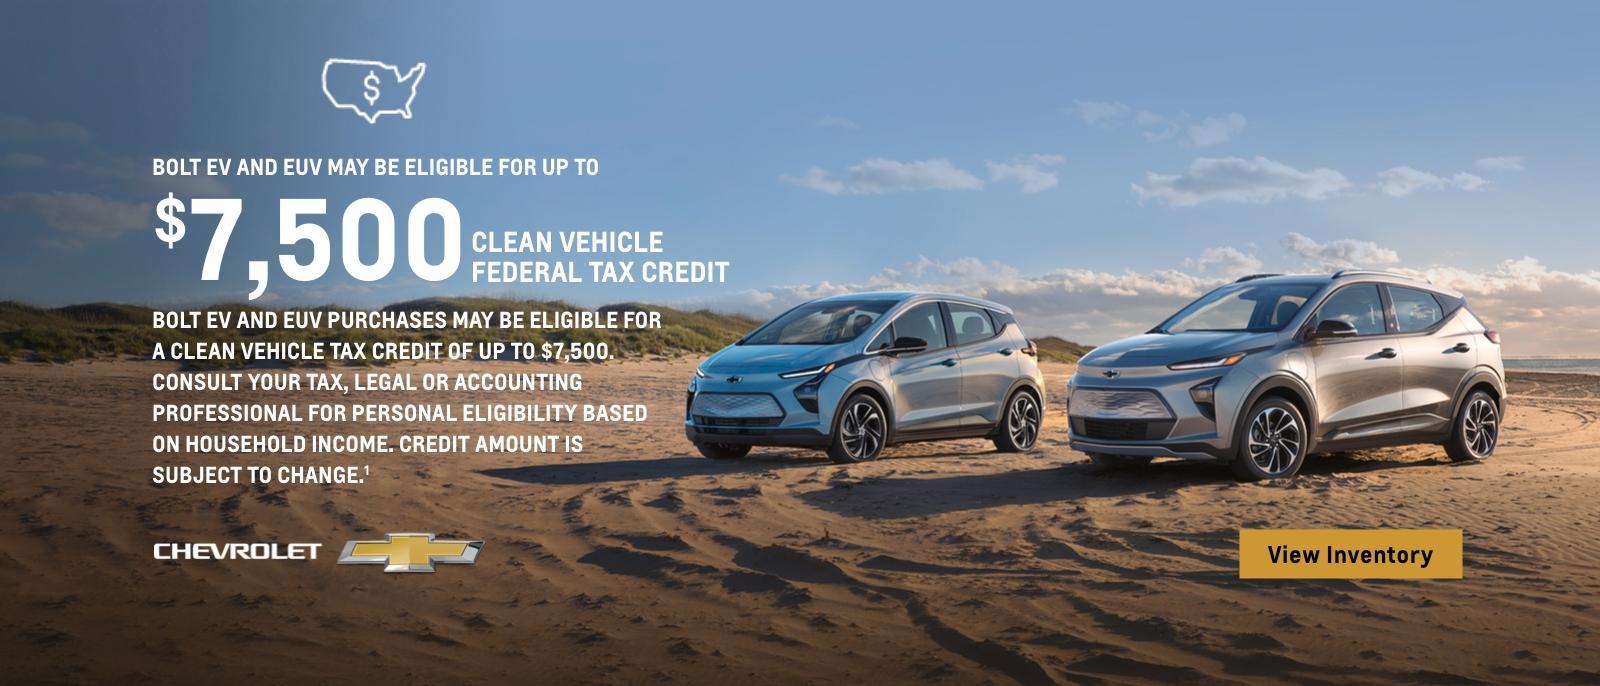 Bolt EV and EUV may be eligible for up to $7,500 Clean Vehicle Federal Tax Credit. Bolt EV and EUV purchases may be eligible for a Clean Vehicle Tax Credit of up to $7,500. Consult your tax, legal or accounting professional for personal eligibility based on household income. Credit amount is subject to change.